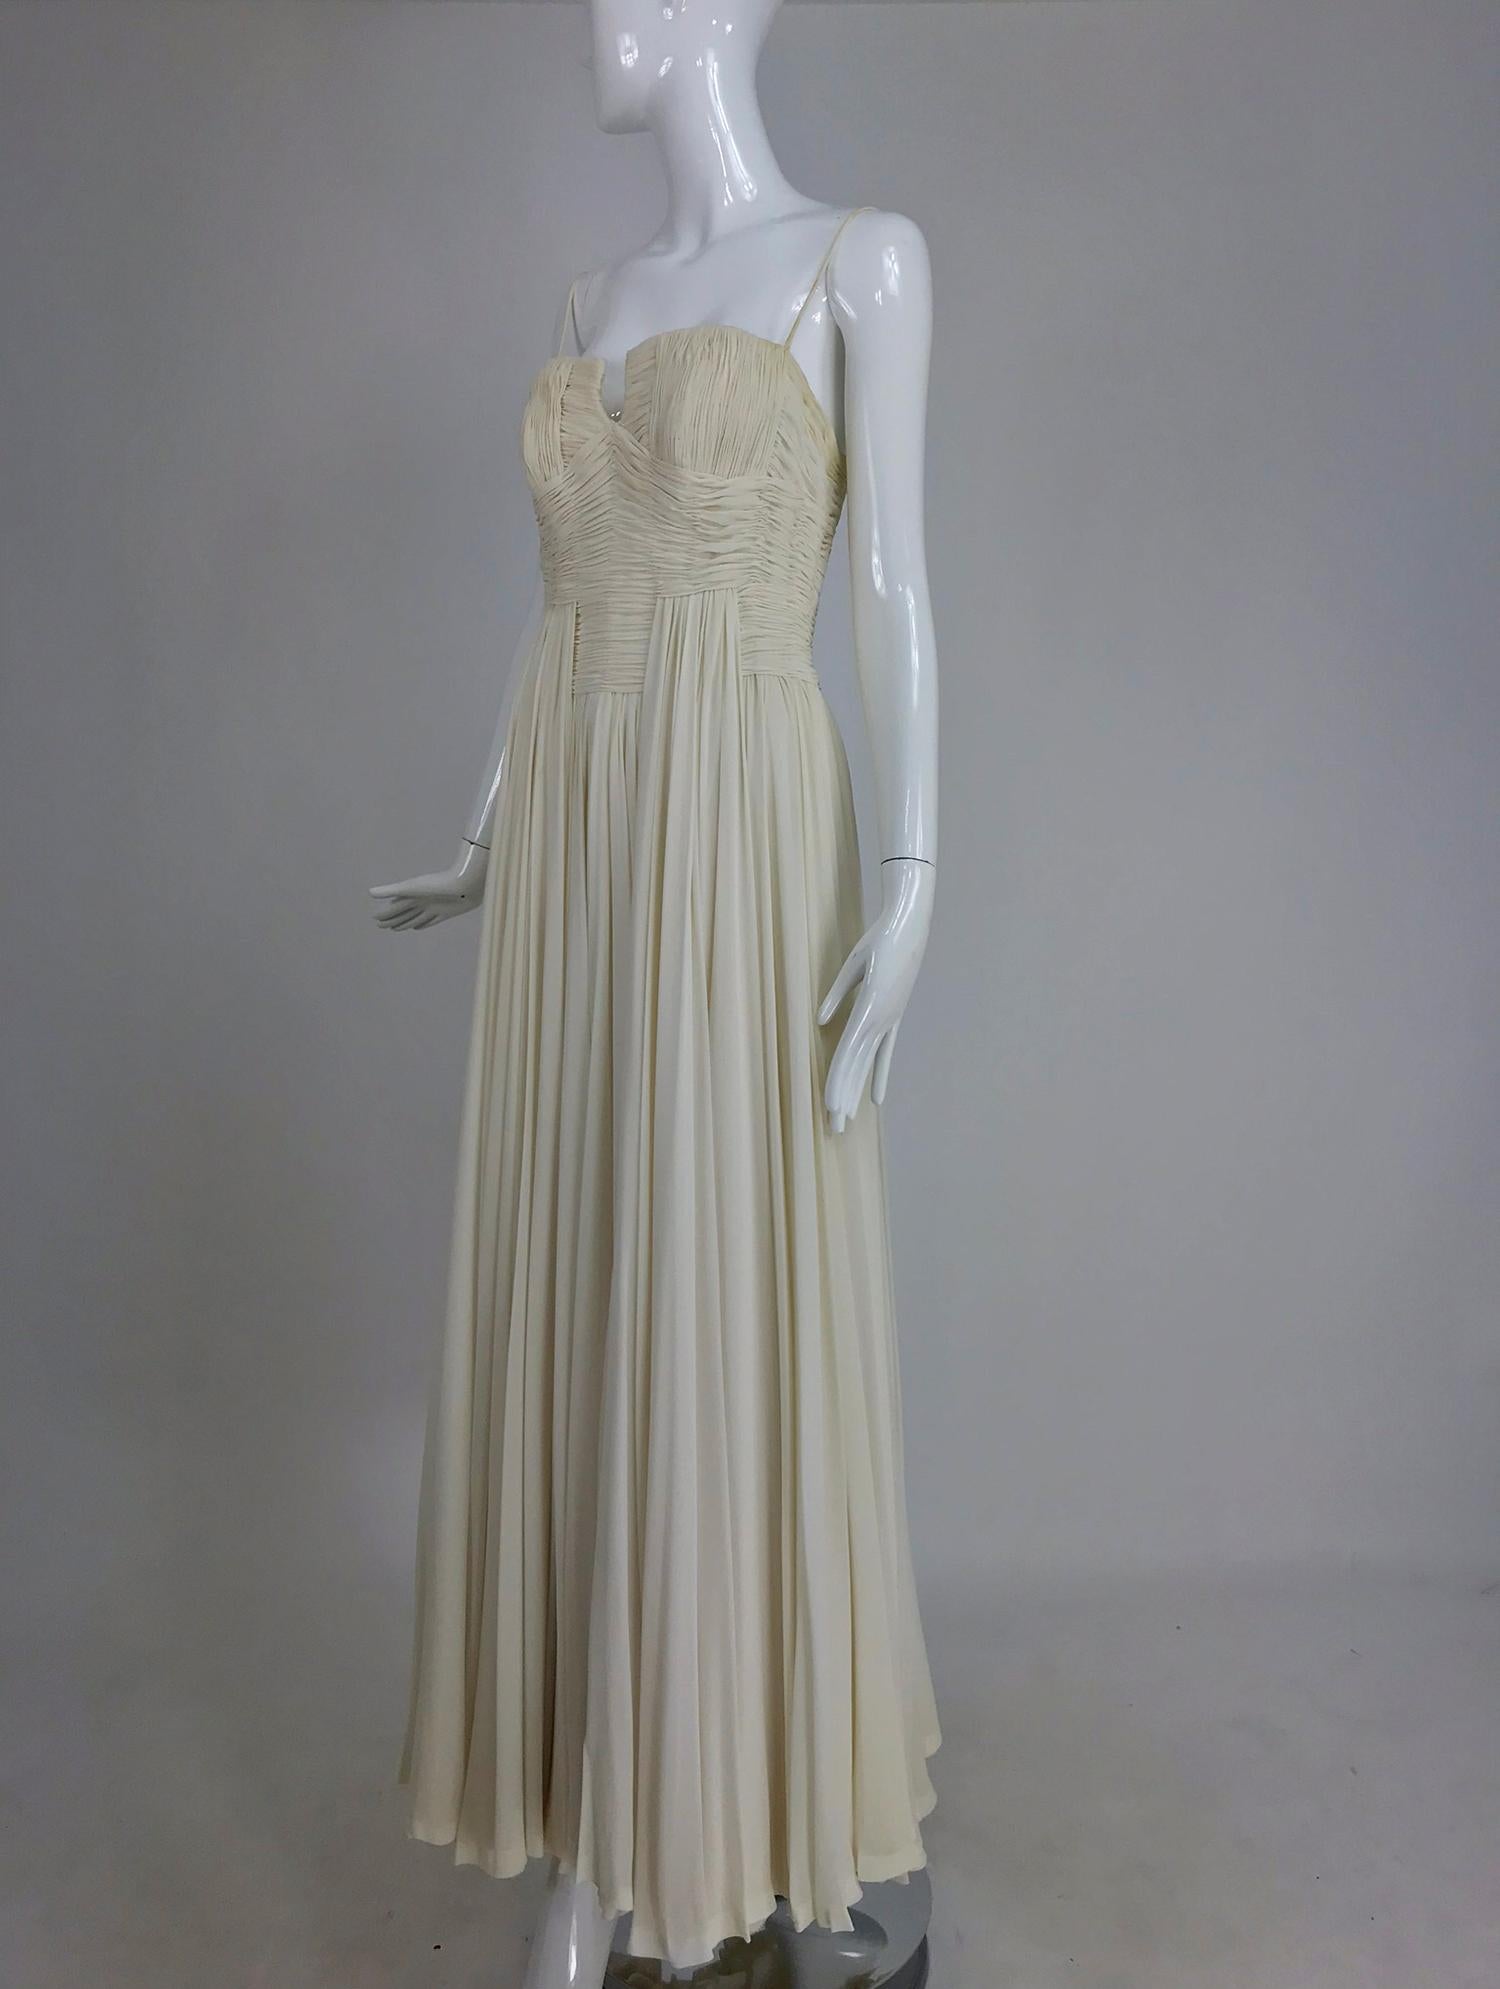 Fernanda Gattinoni Couture Ivory pleated silk chiffon evening gown from the late 1950s.  In 1906, 17 year old Fernanda Gattinoni left Italy for London to apprentice at the Molineaux fashion house, a leading atelier of the day. She turned down an